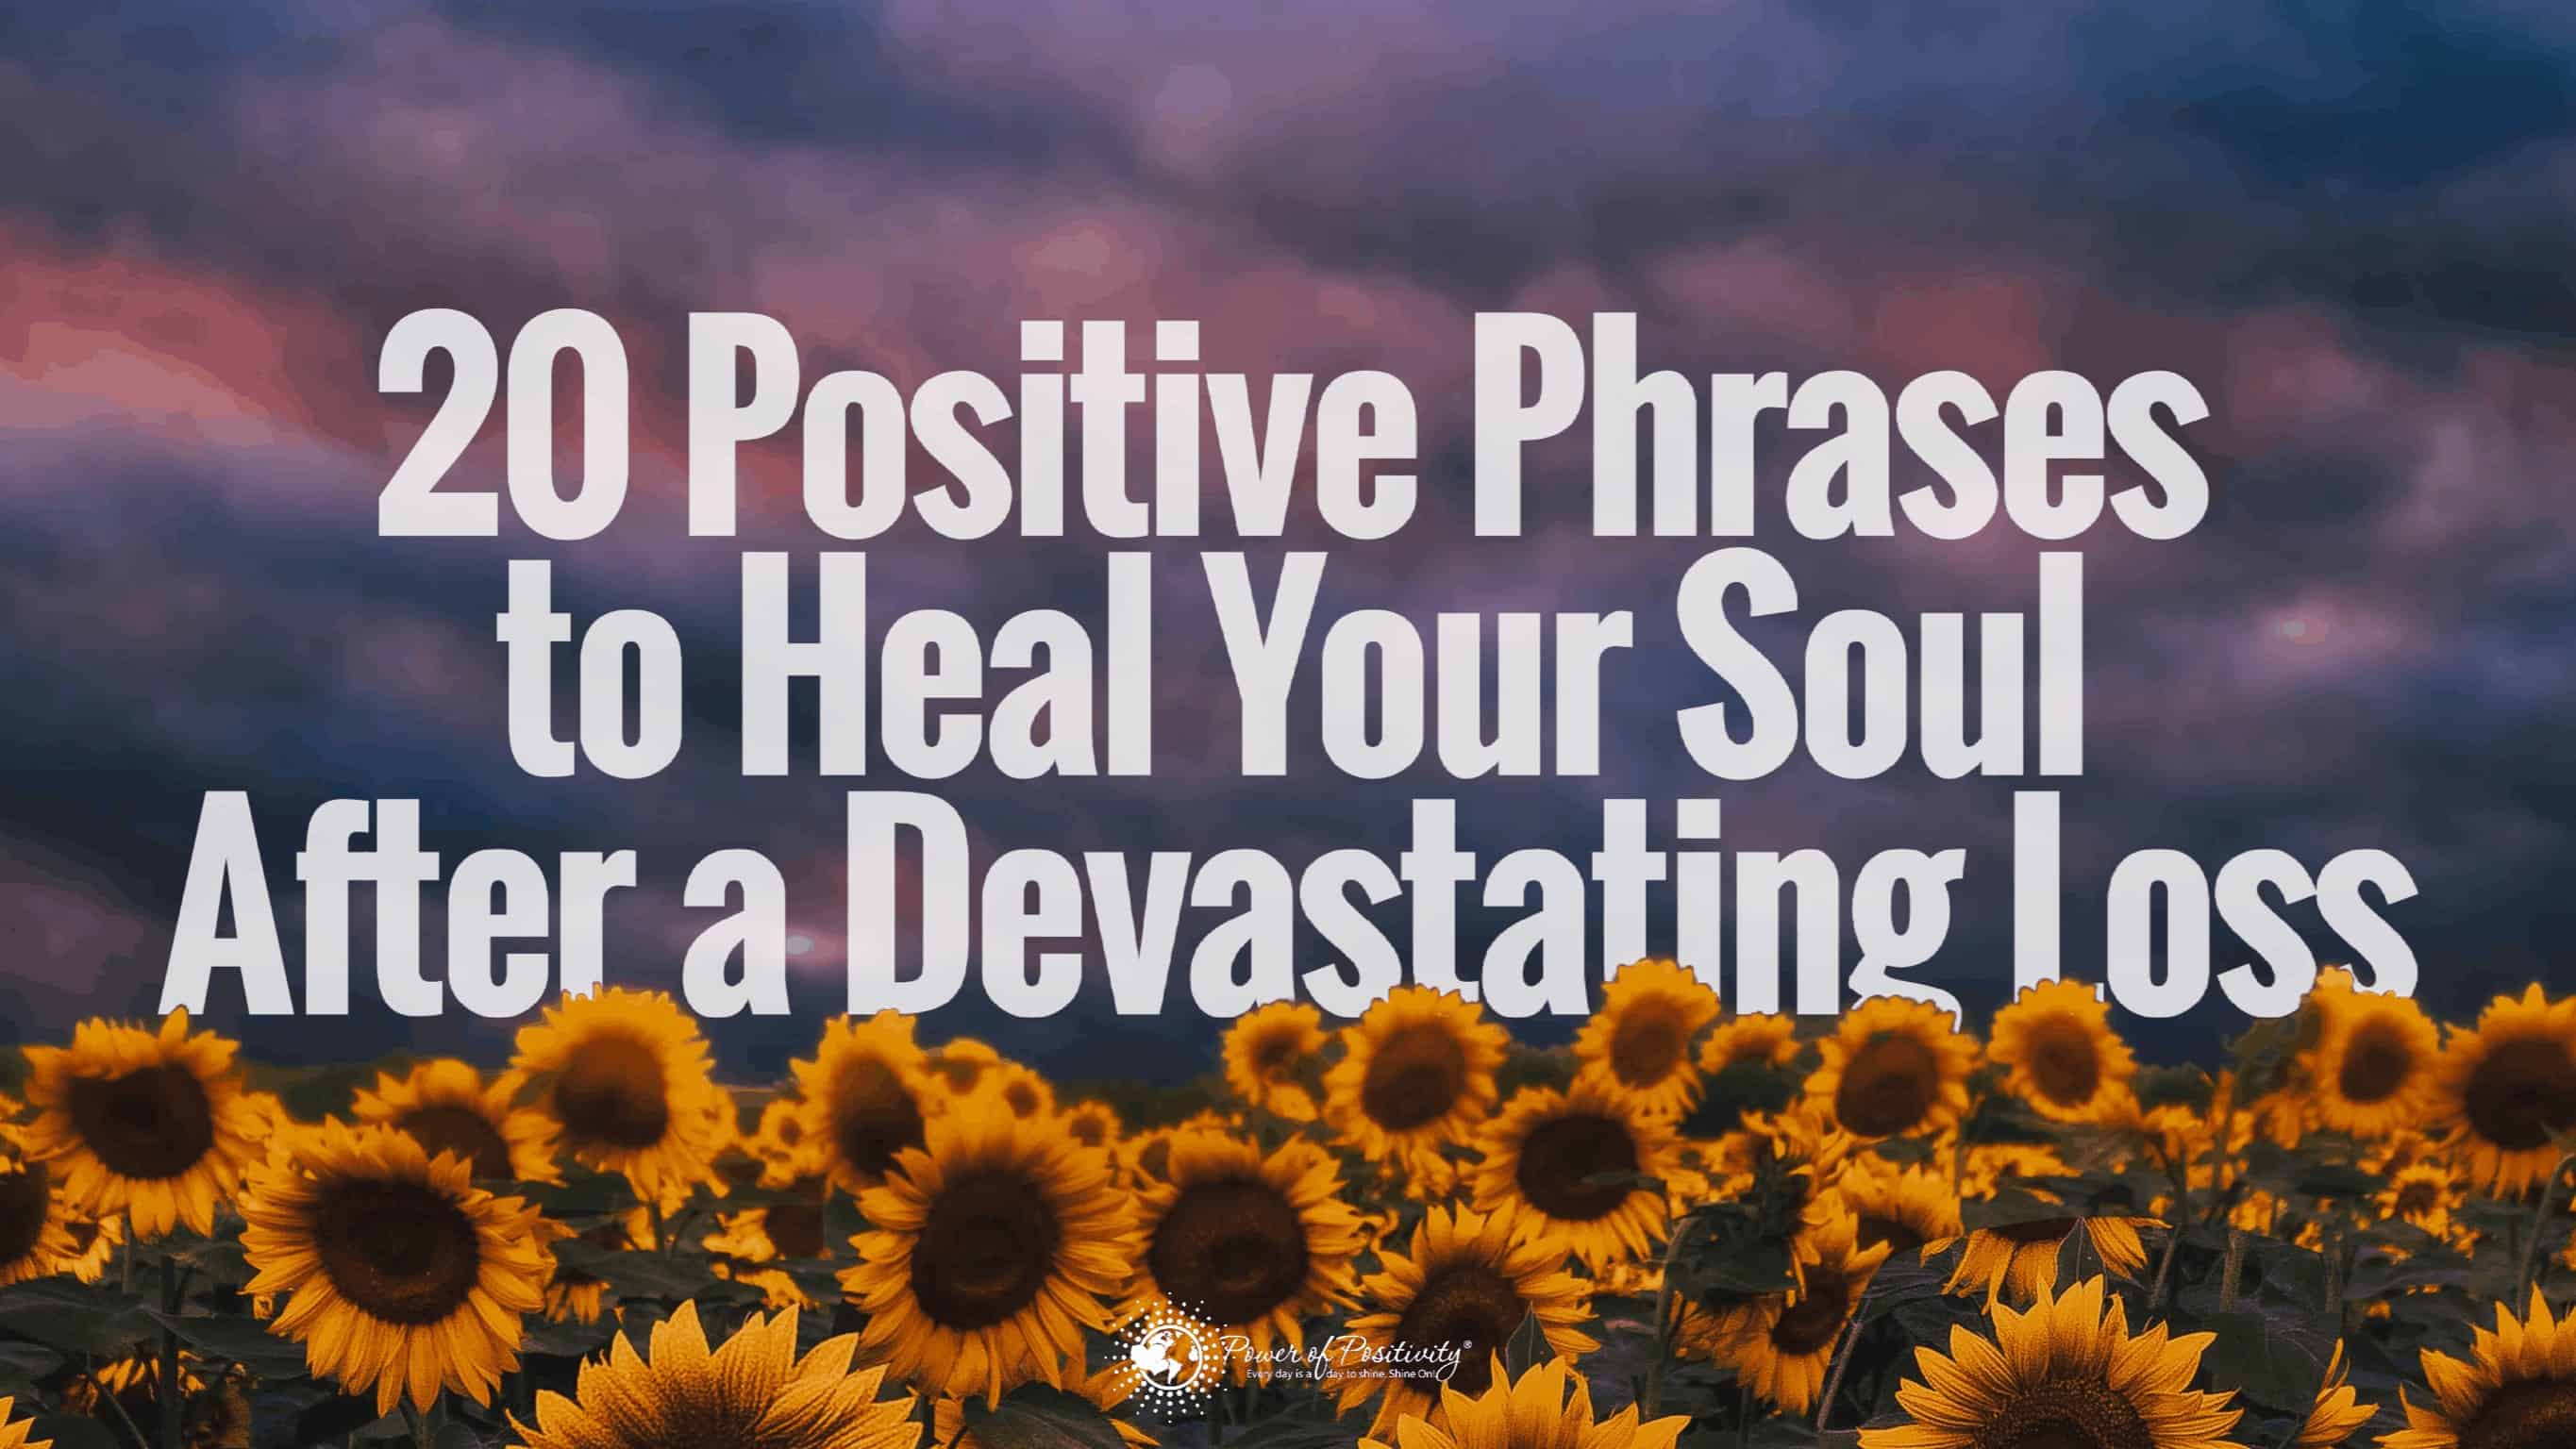 20 Positive Phrases to Heal Your Soul After a Devastating Loss